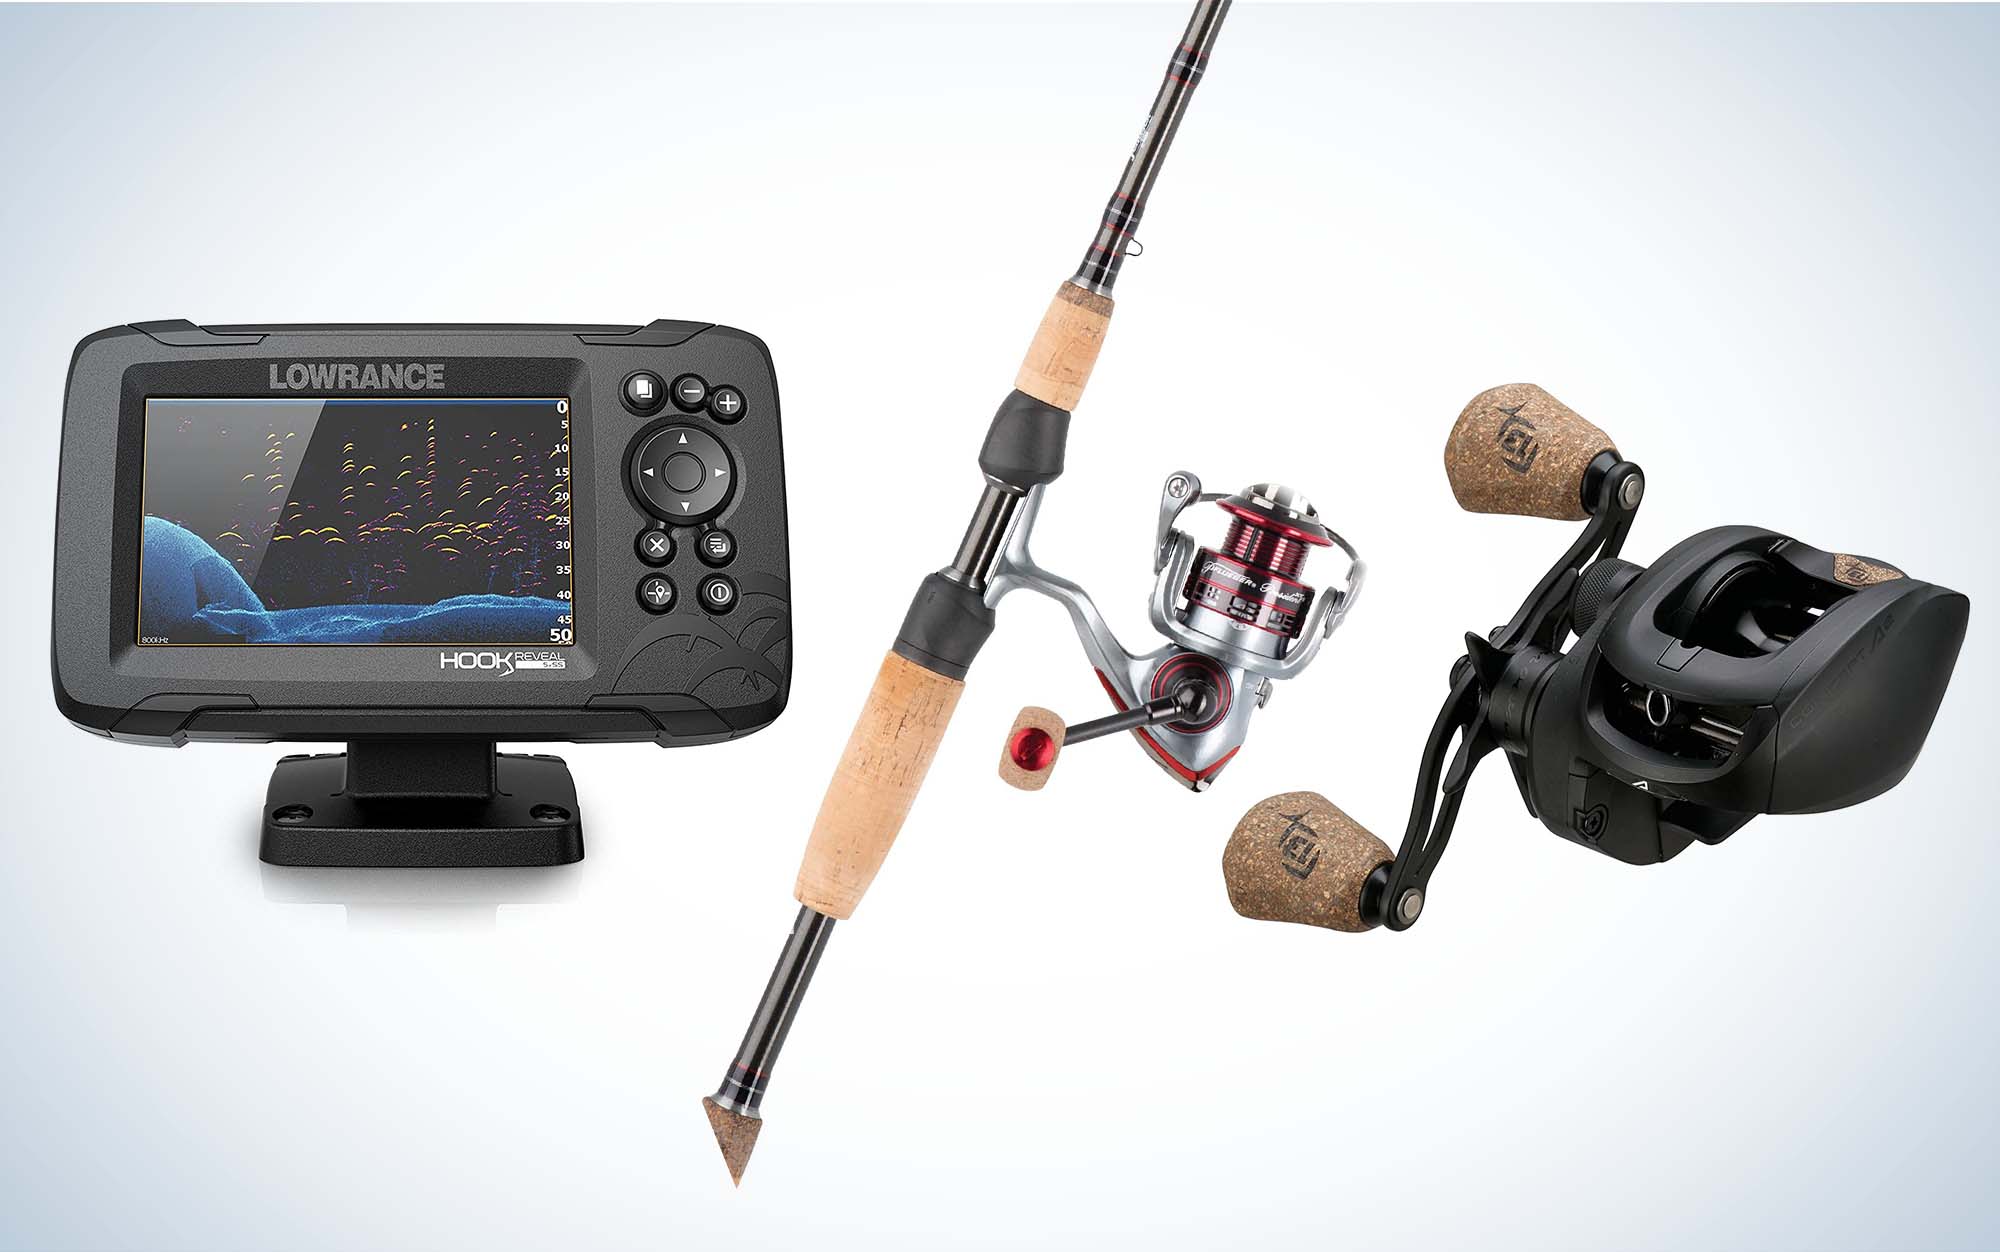 Deals on Rods, Reels, and Fish Finders